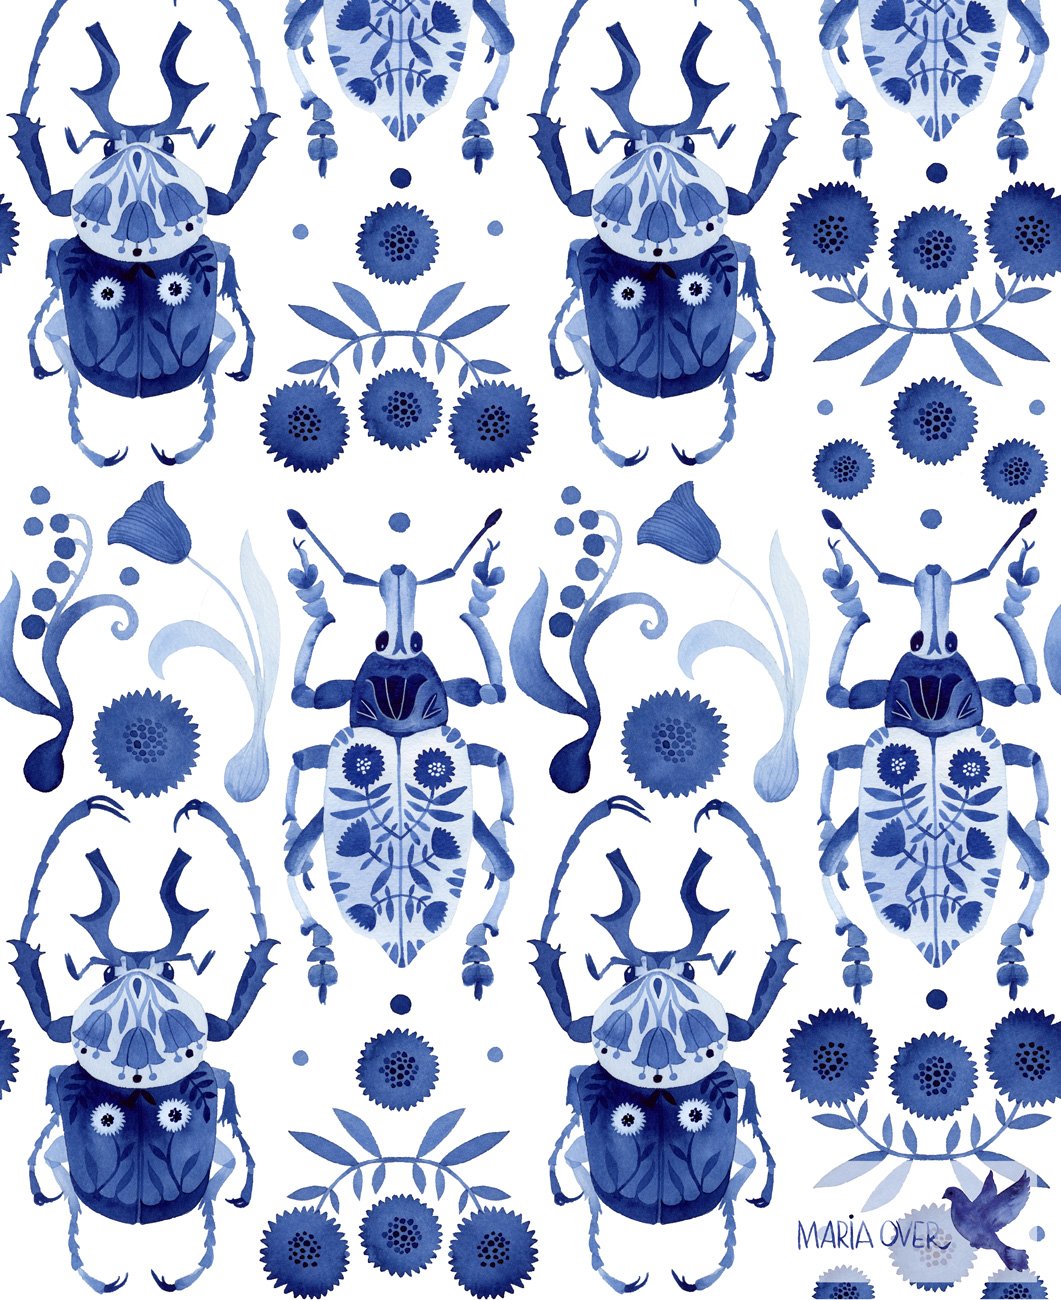 bugs-and-bulbs-pattern-show-insta.jpg